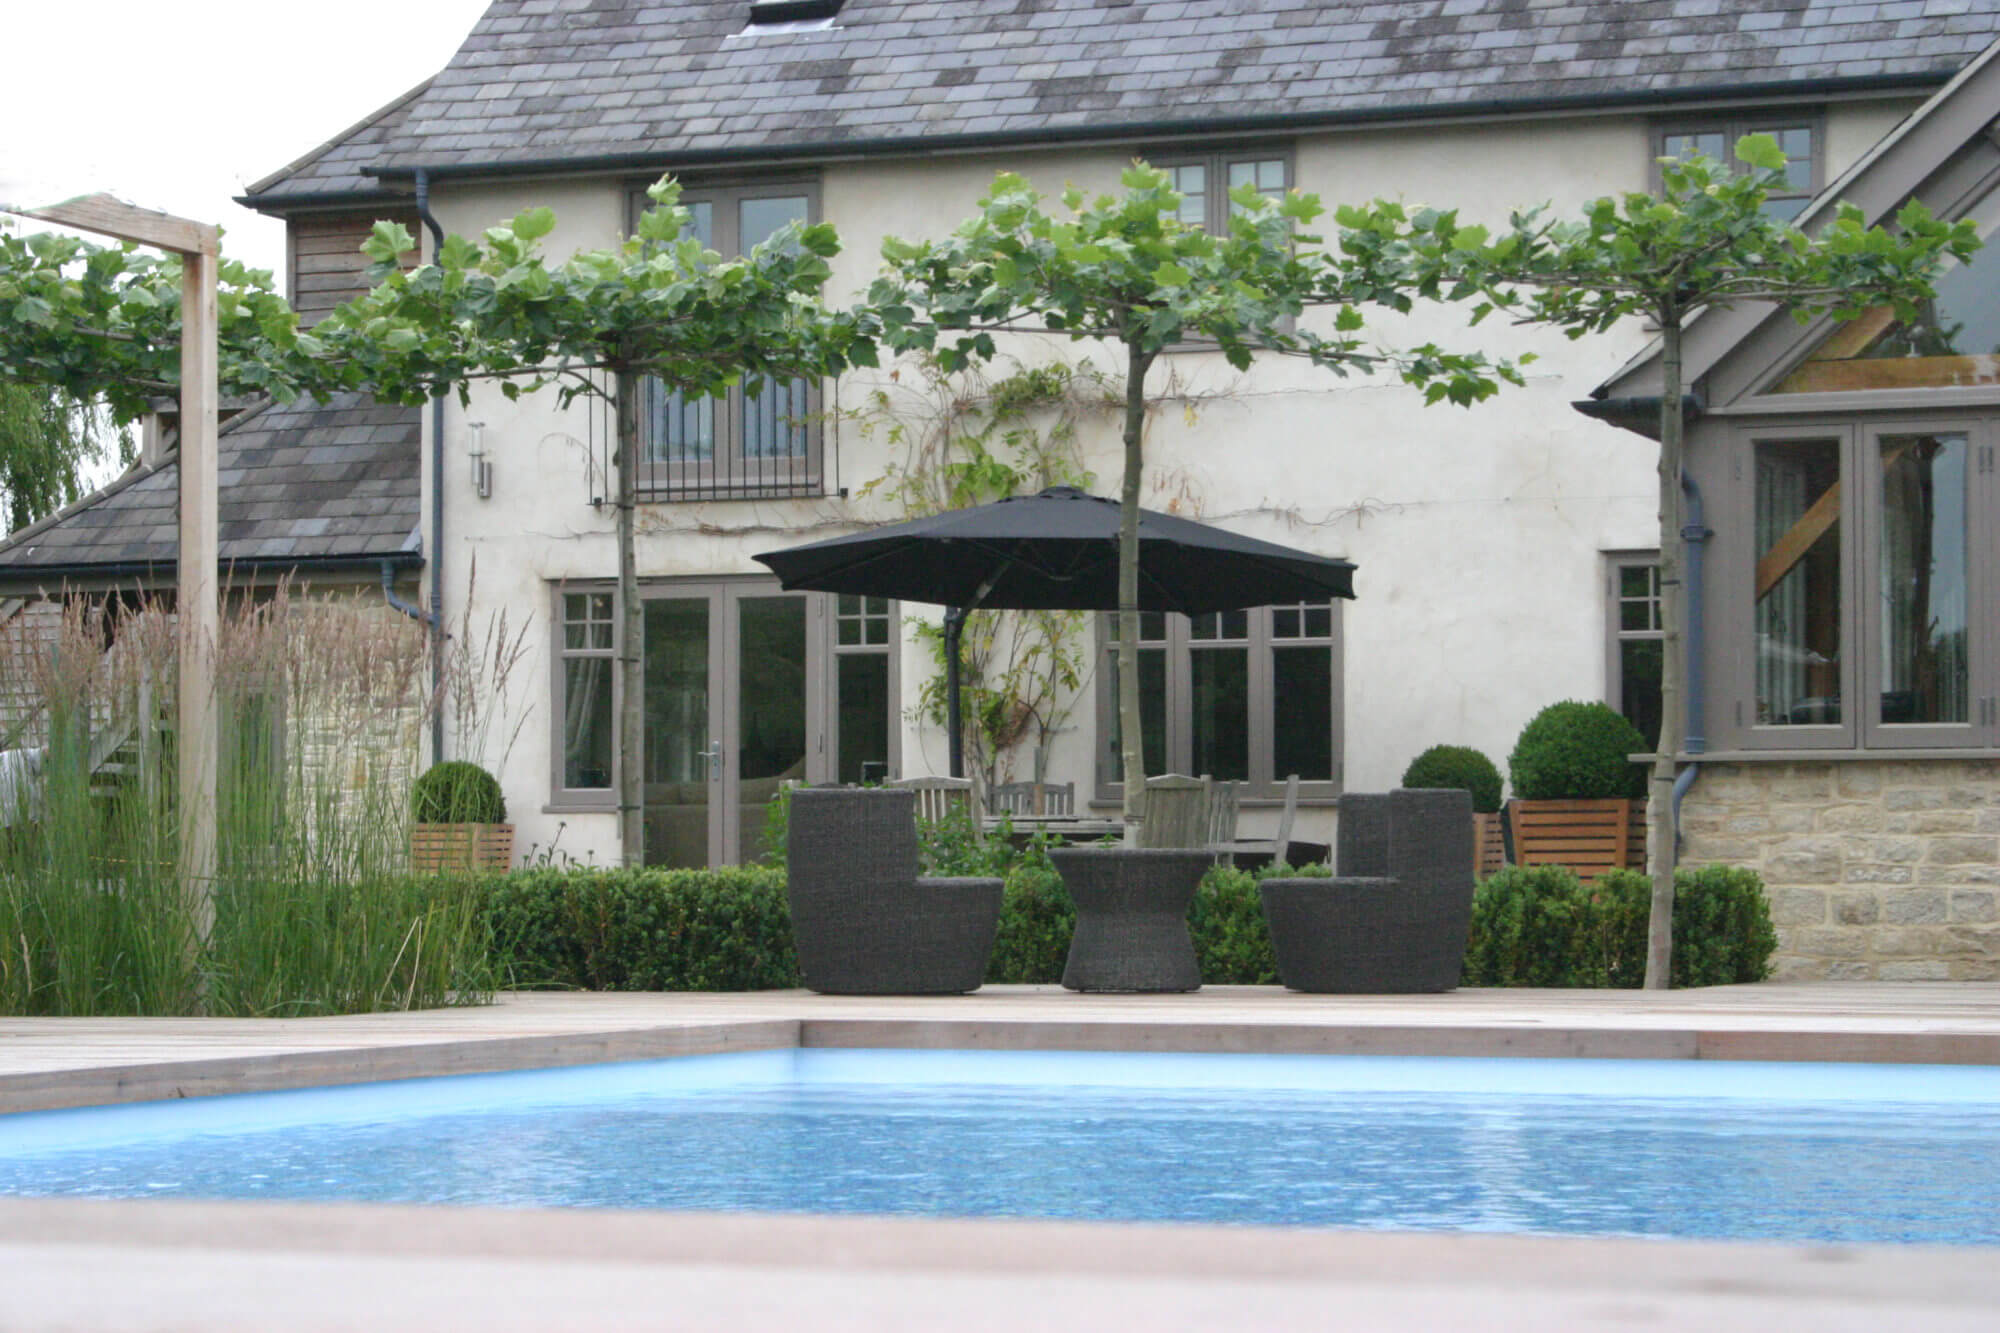 Cotswolds garden with swimming pool, farmhouse and manicured planting